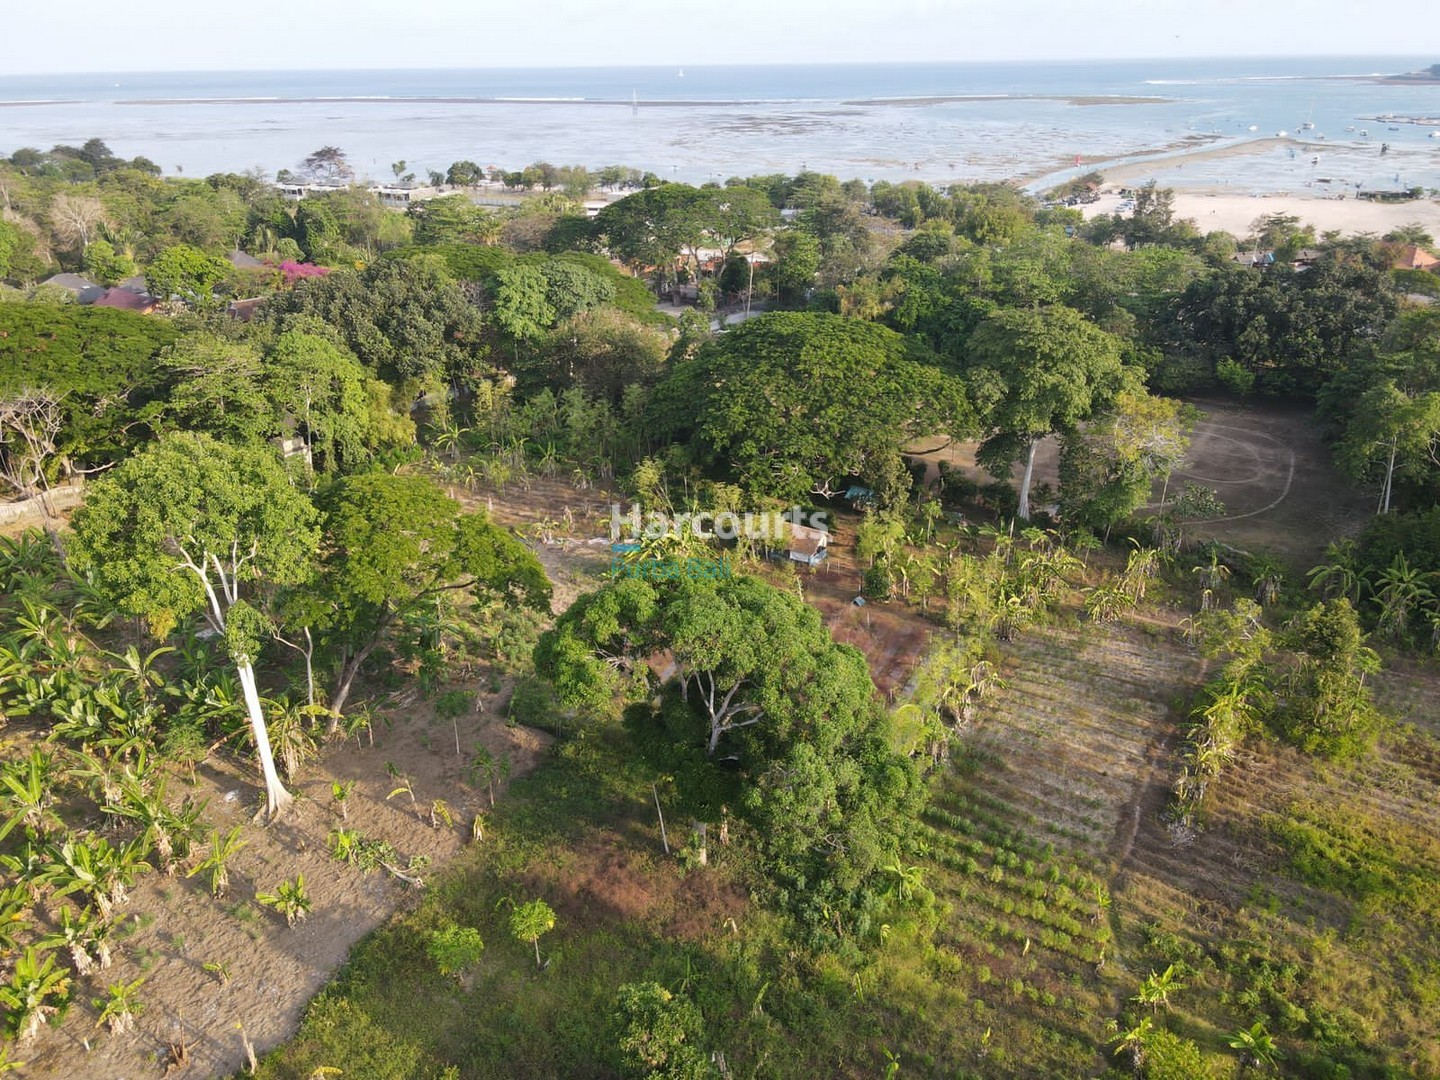 Bali Land for Lease: Mertasari, Sanur - Rare Opportunity to Acquire Ocean View Land